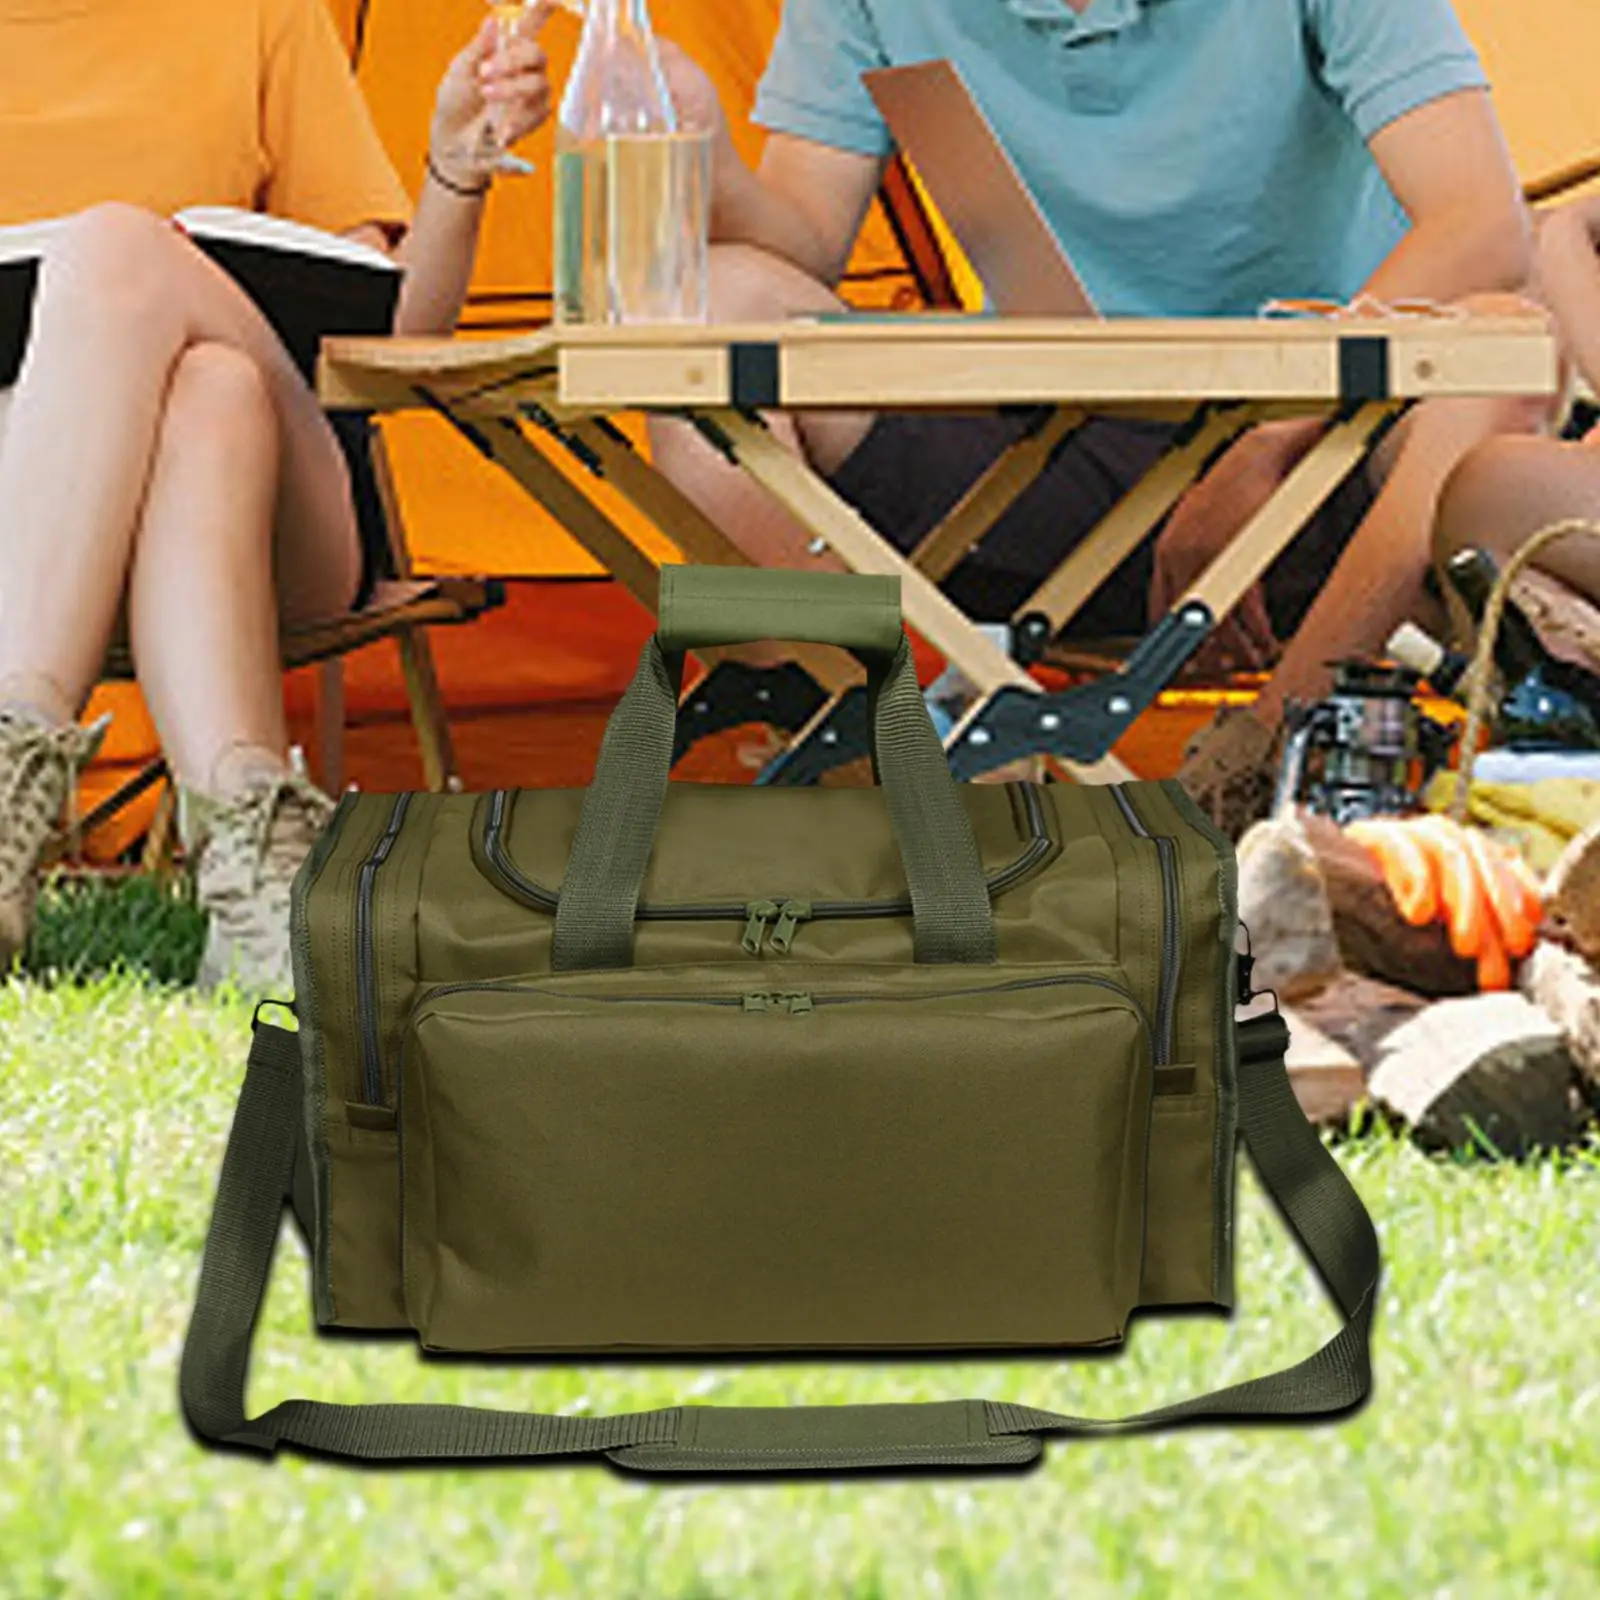 Barbecue Tool Storage Bag Lunch Box Wear Resistant Picnic Basket for Grill